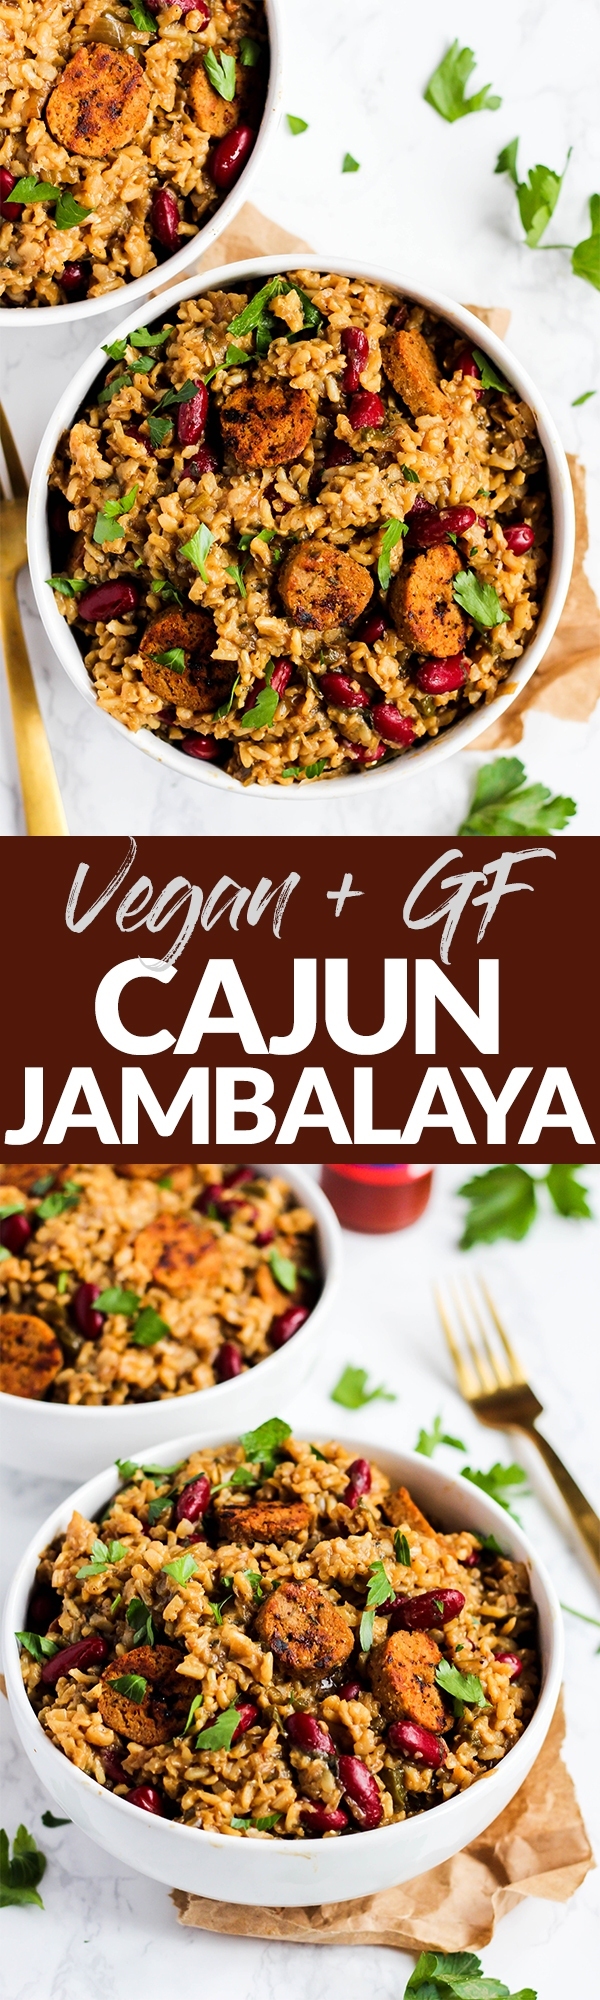 Serve this Classic Cajun Vegan Jambalaya to a crowd as a comforting, one-pot meal that will impress everyone! Authentic, simple & so full of Creole flavor. (gluten-free)